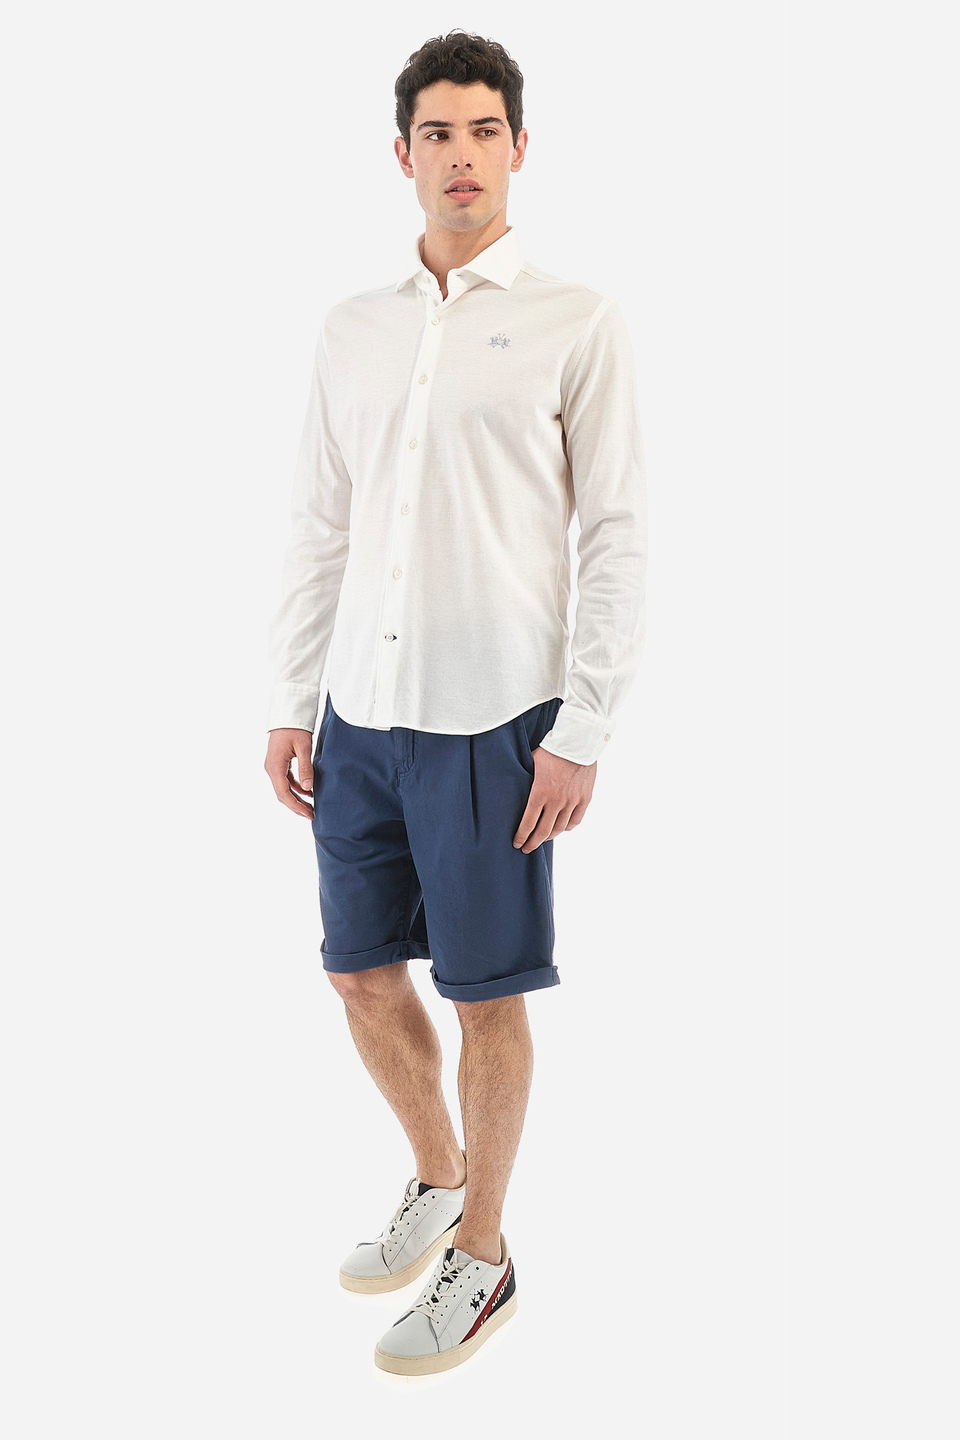 Long-sleeved shirt in cotton piqué, fitted cut for men - Qalam | La Martina - Official Online Shop